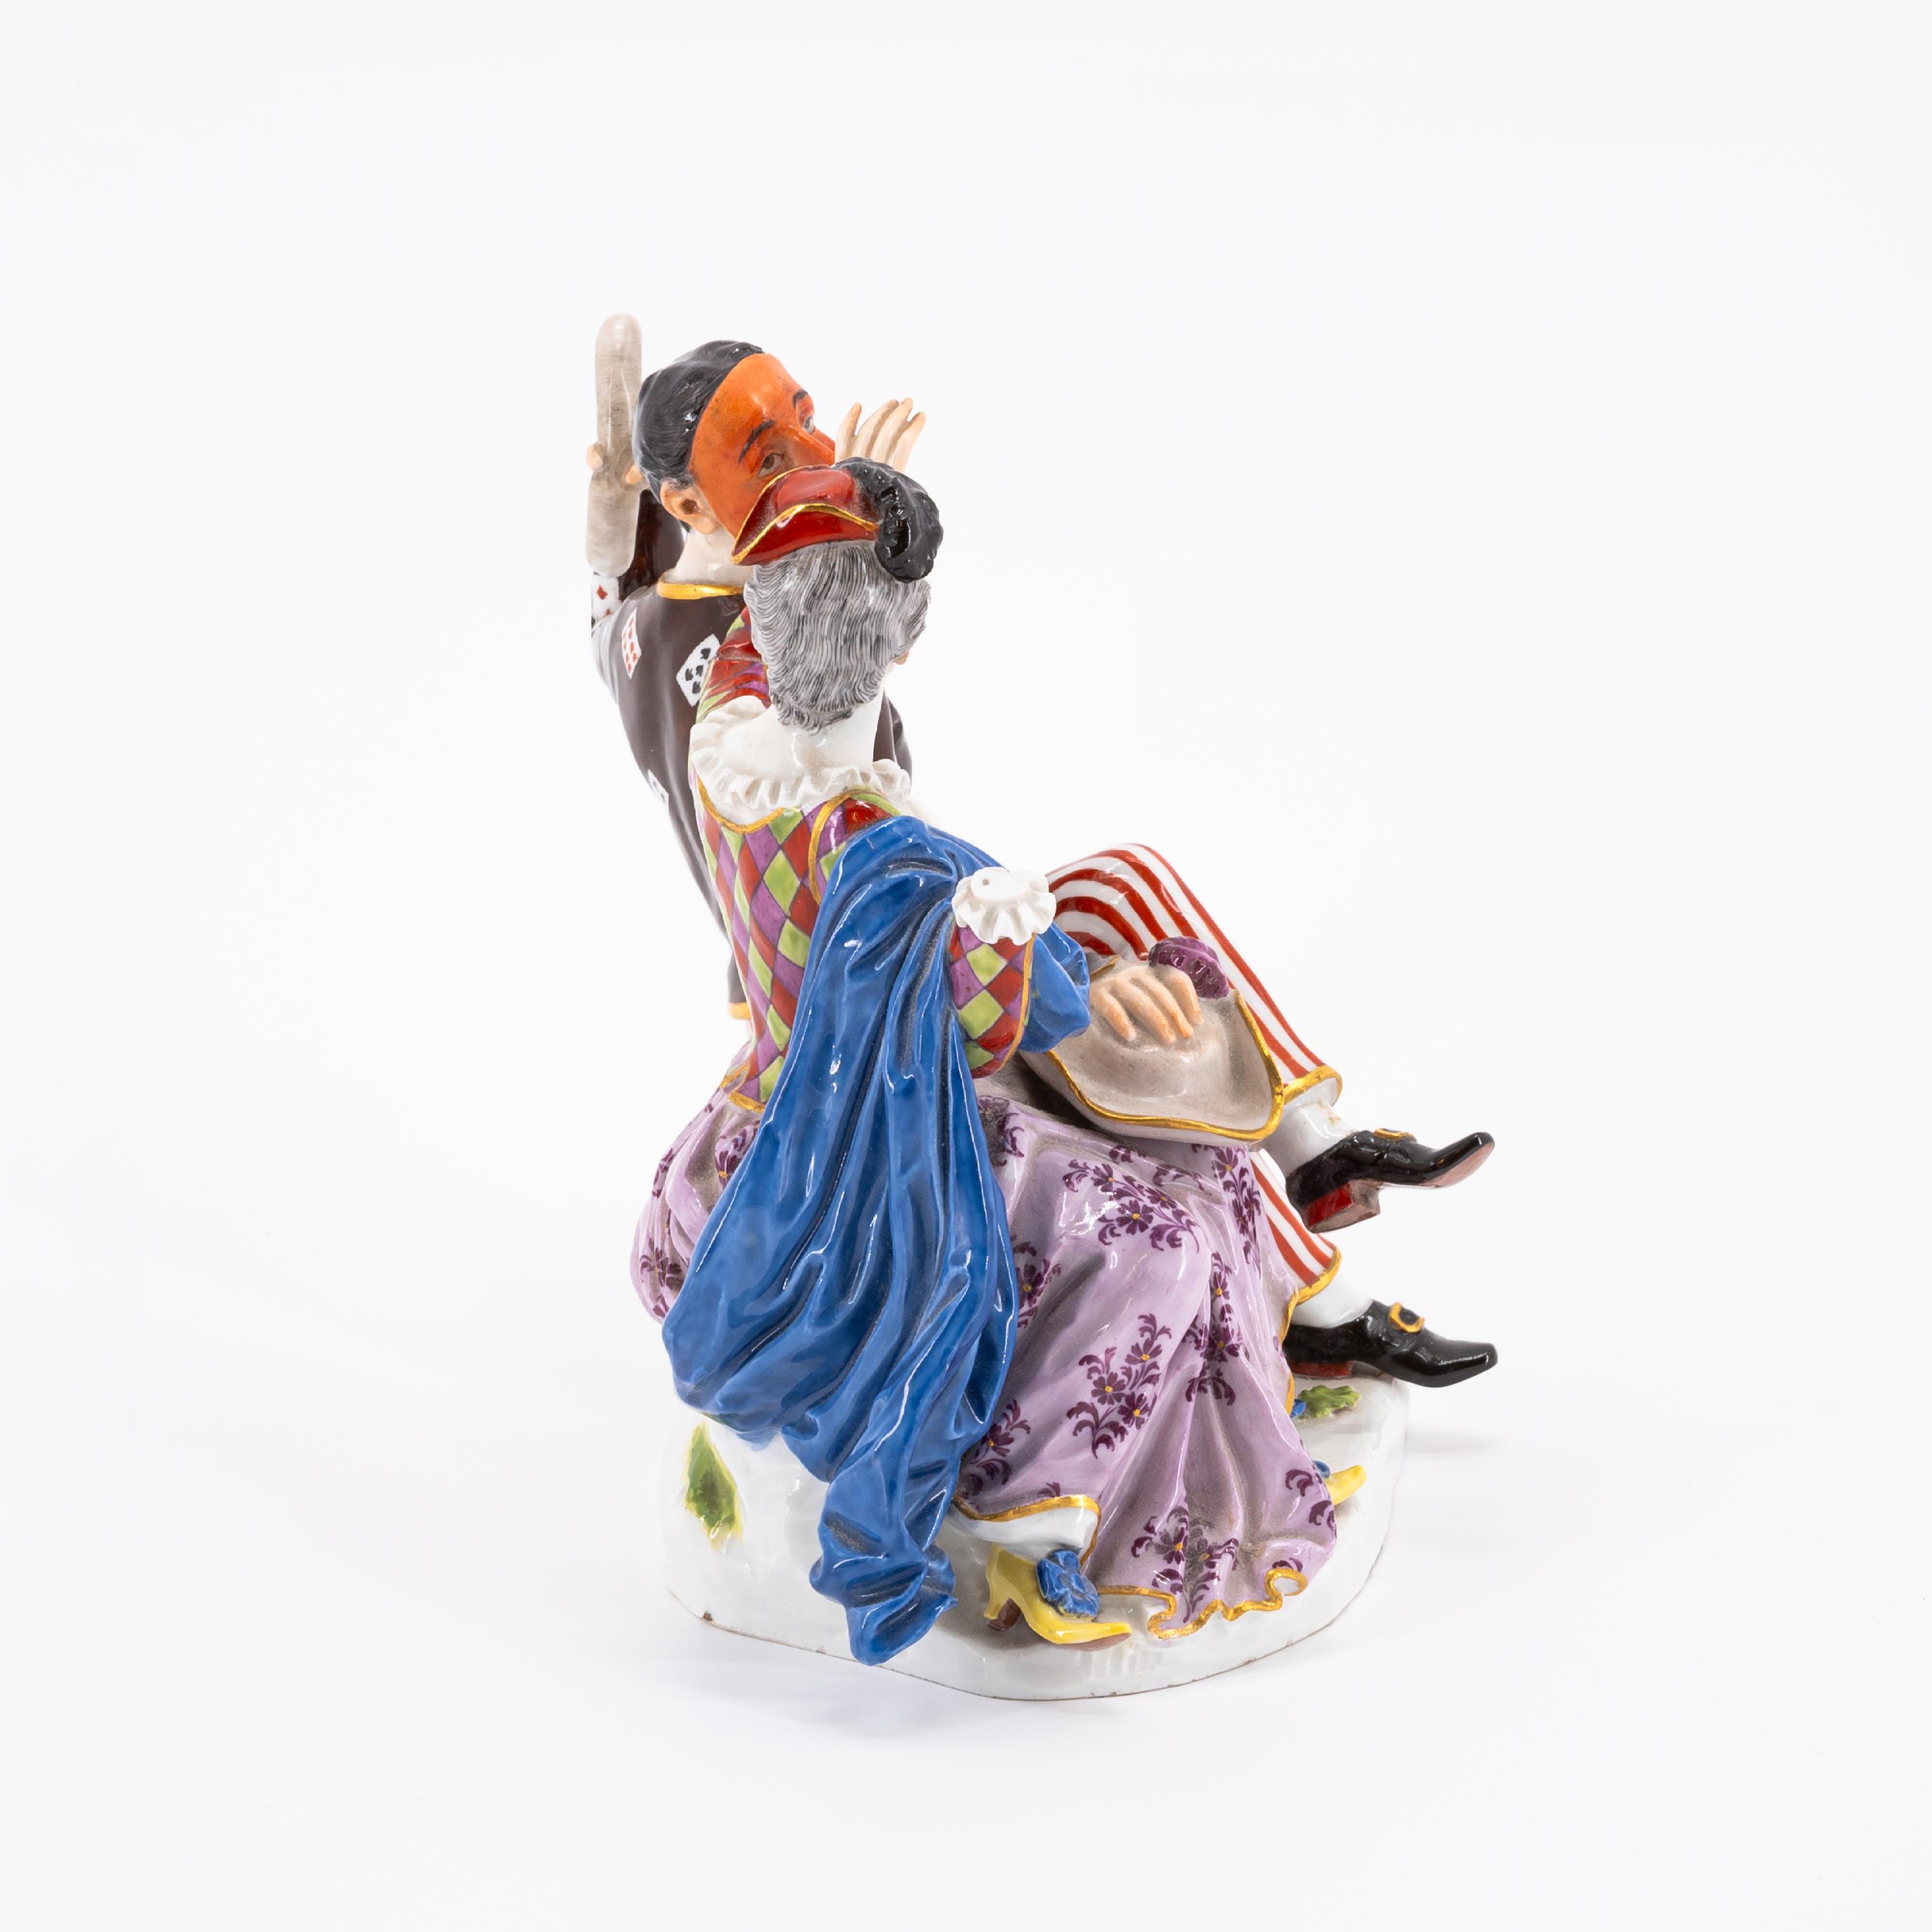 PORCELAIN PAIR OF FIGURES FORM THE 'COMMEDIA DELL'ARTE' - Image 4 of 5